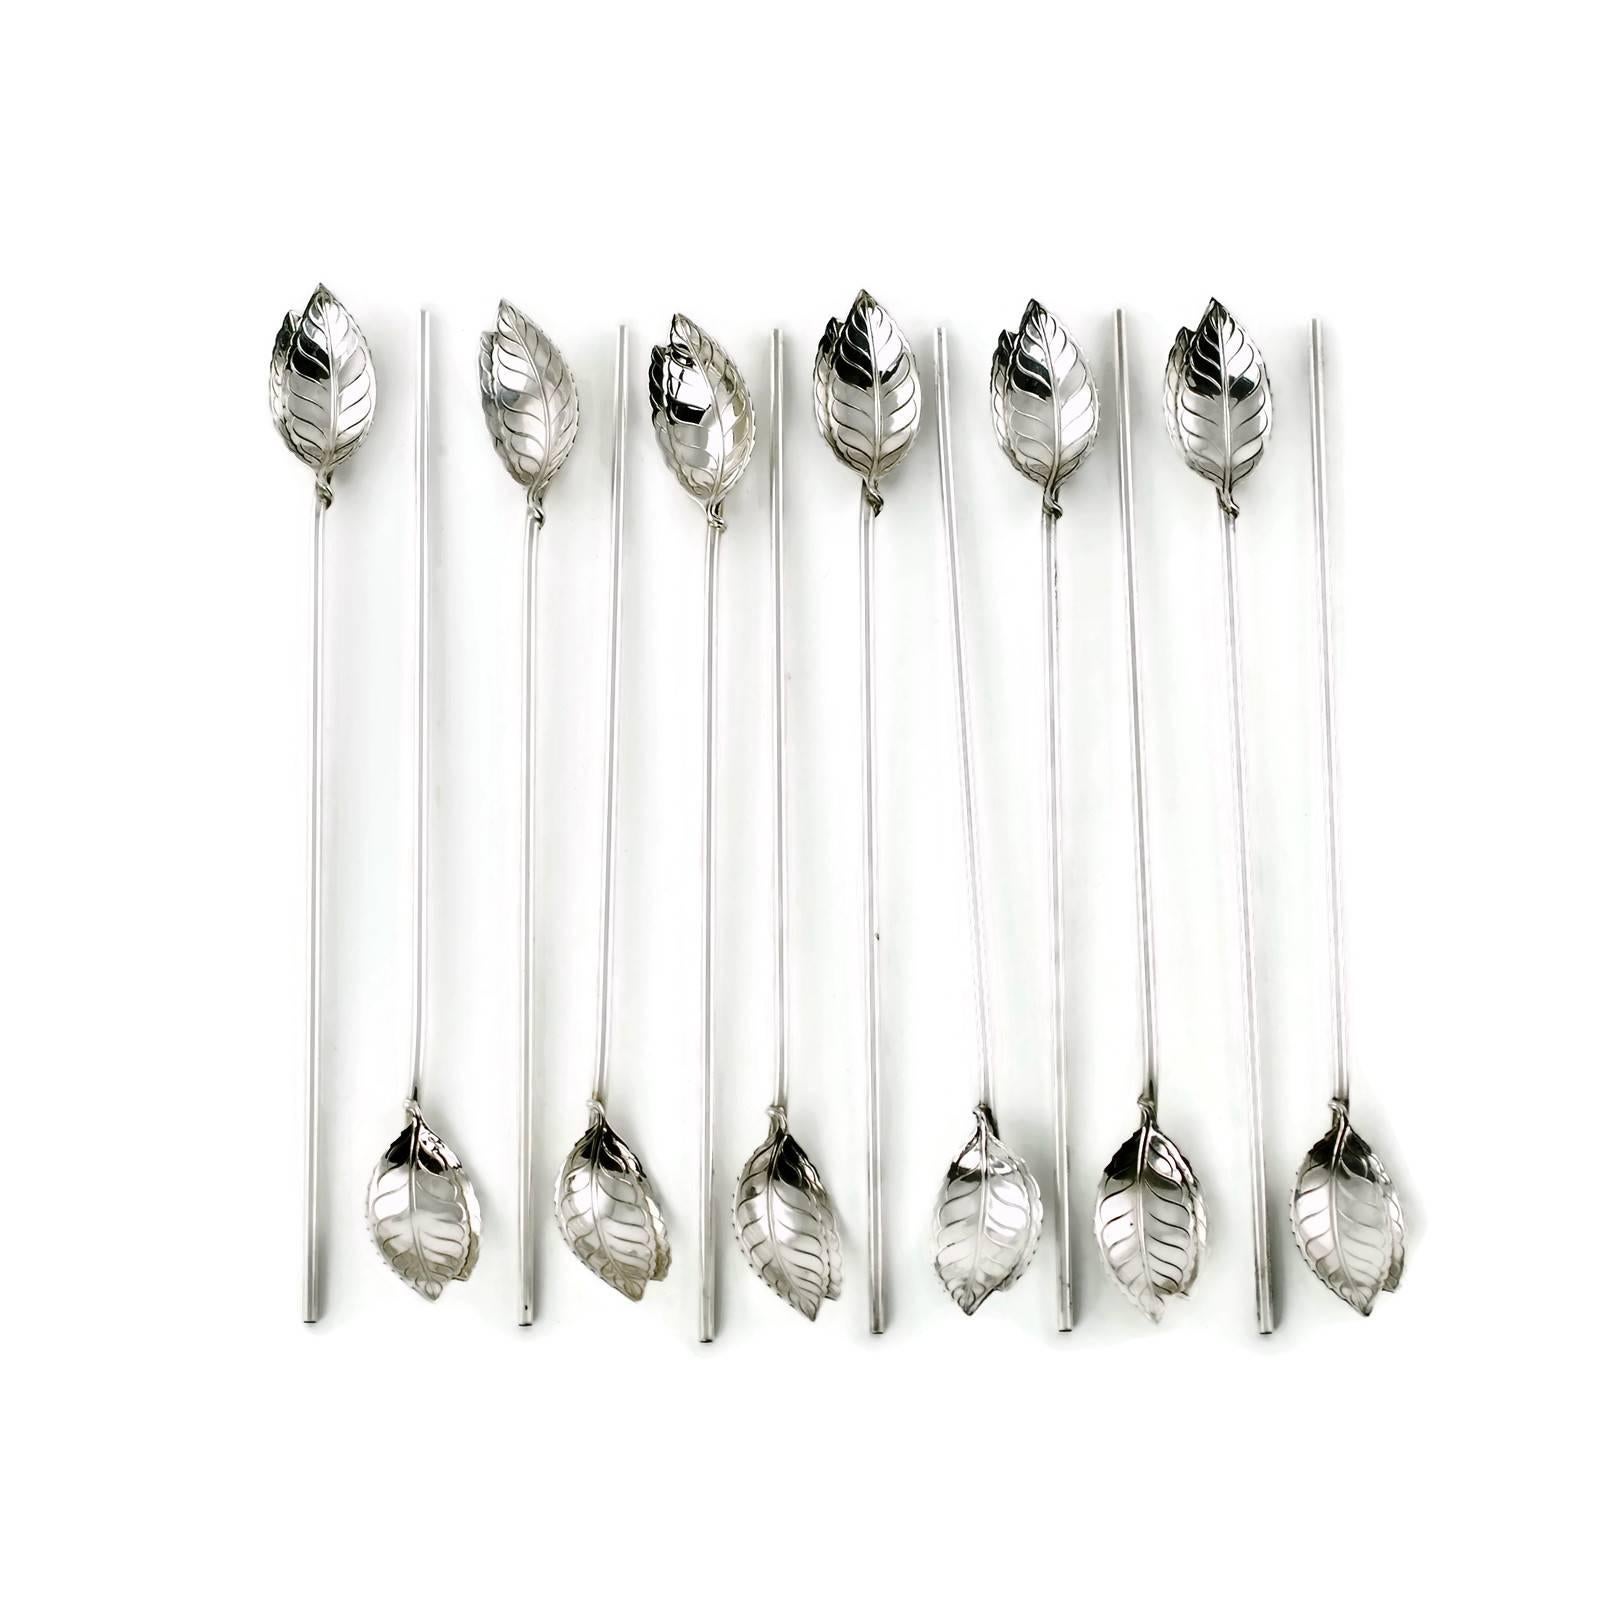 This set of 12 mint julep spoons / straws was made by Tiffany & Company. The pieces are composed of sterling silver with bowls that have been cast in the form of realistic mint leaves with serrated edges. The long thin handles are hollow and also